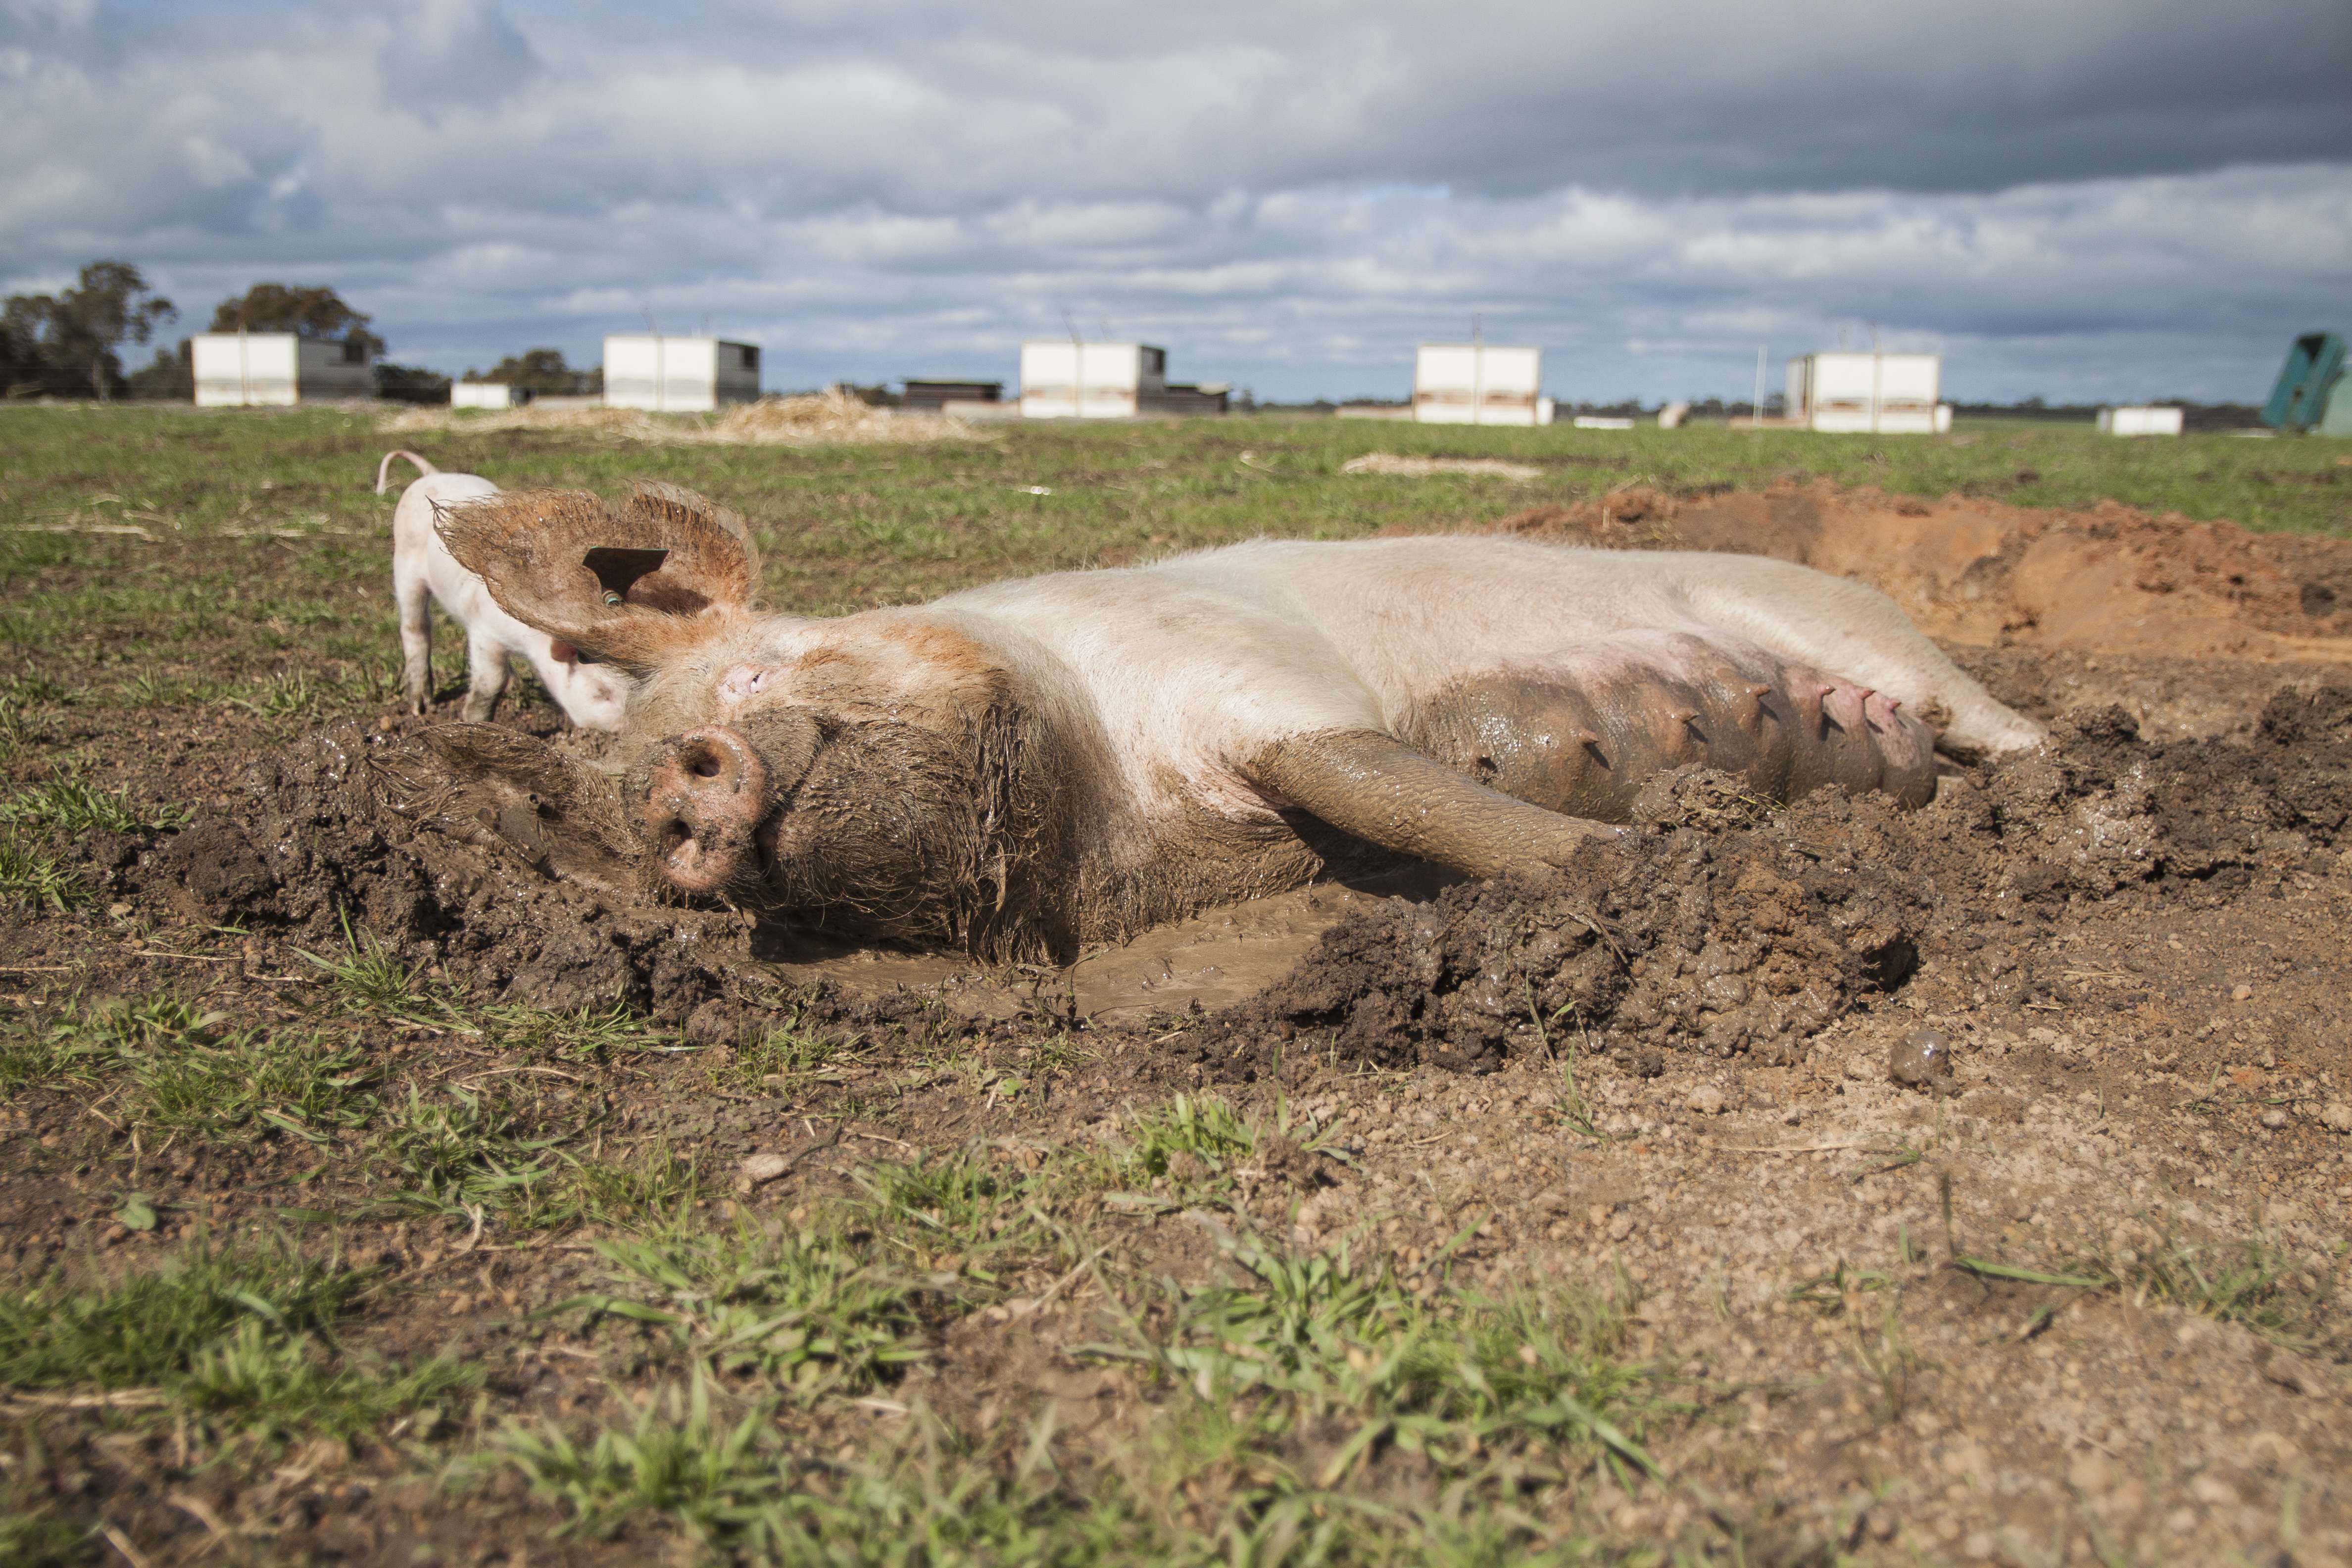 a sow rests in a wallow outdoors while her piglets run around her